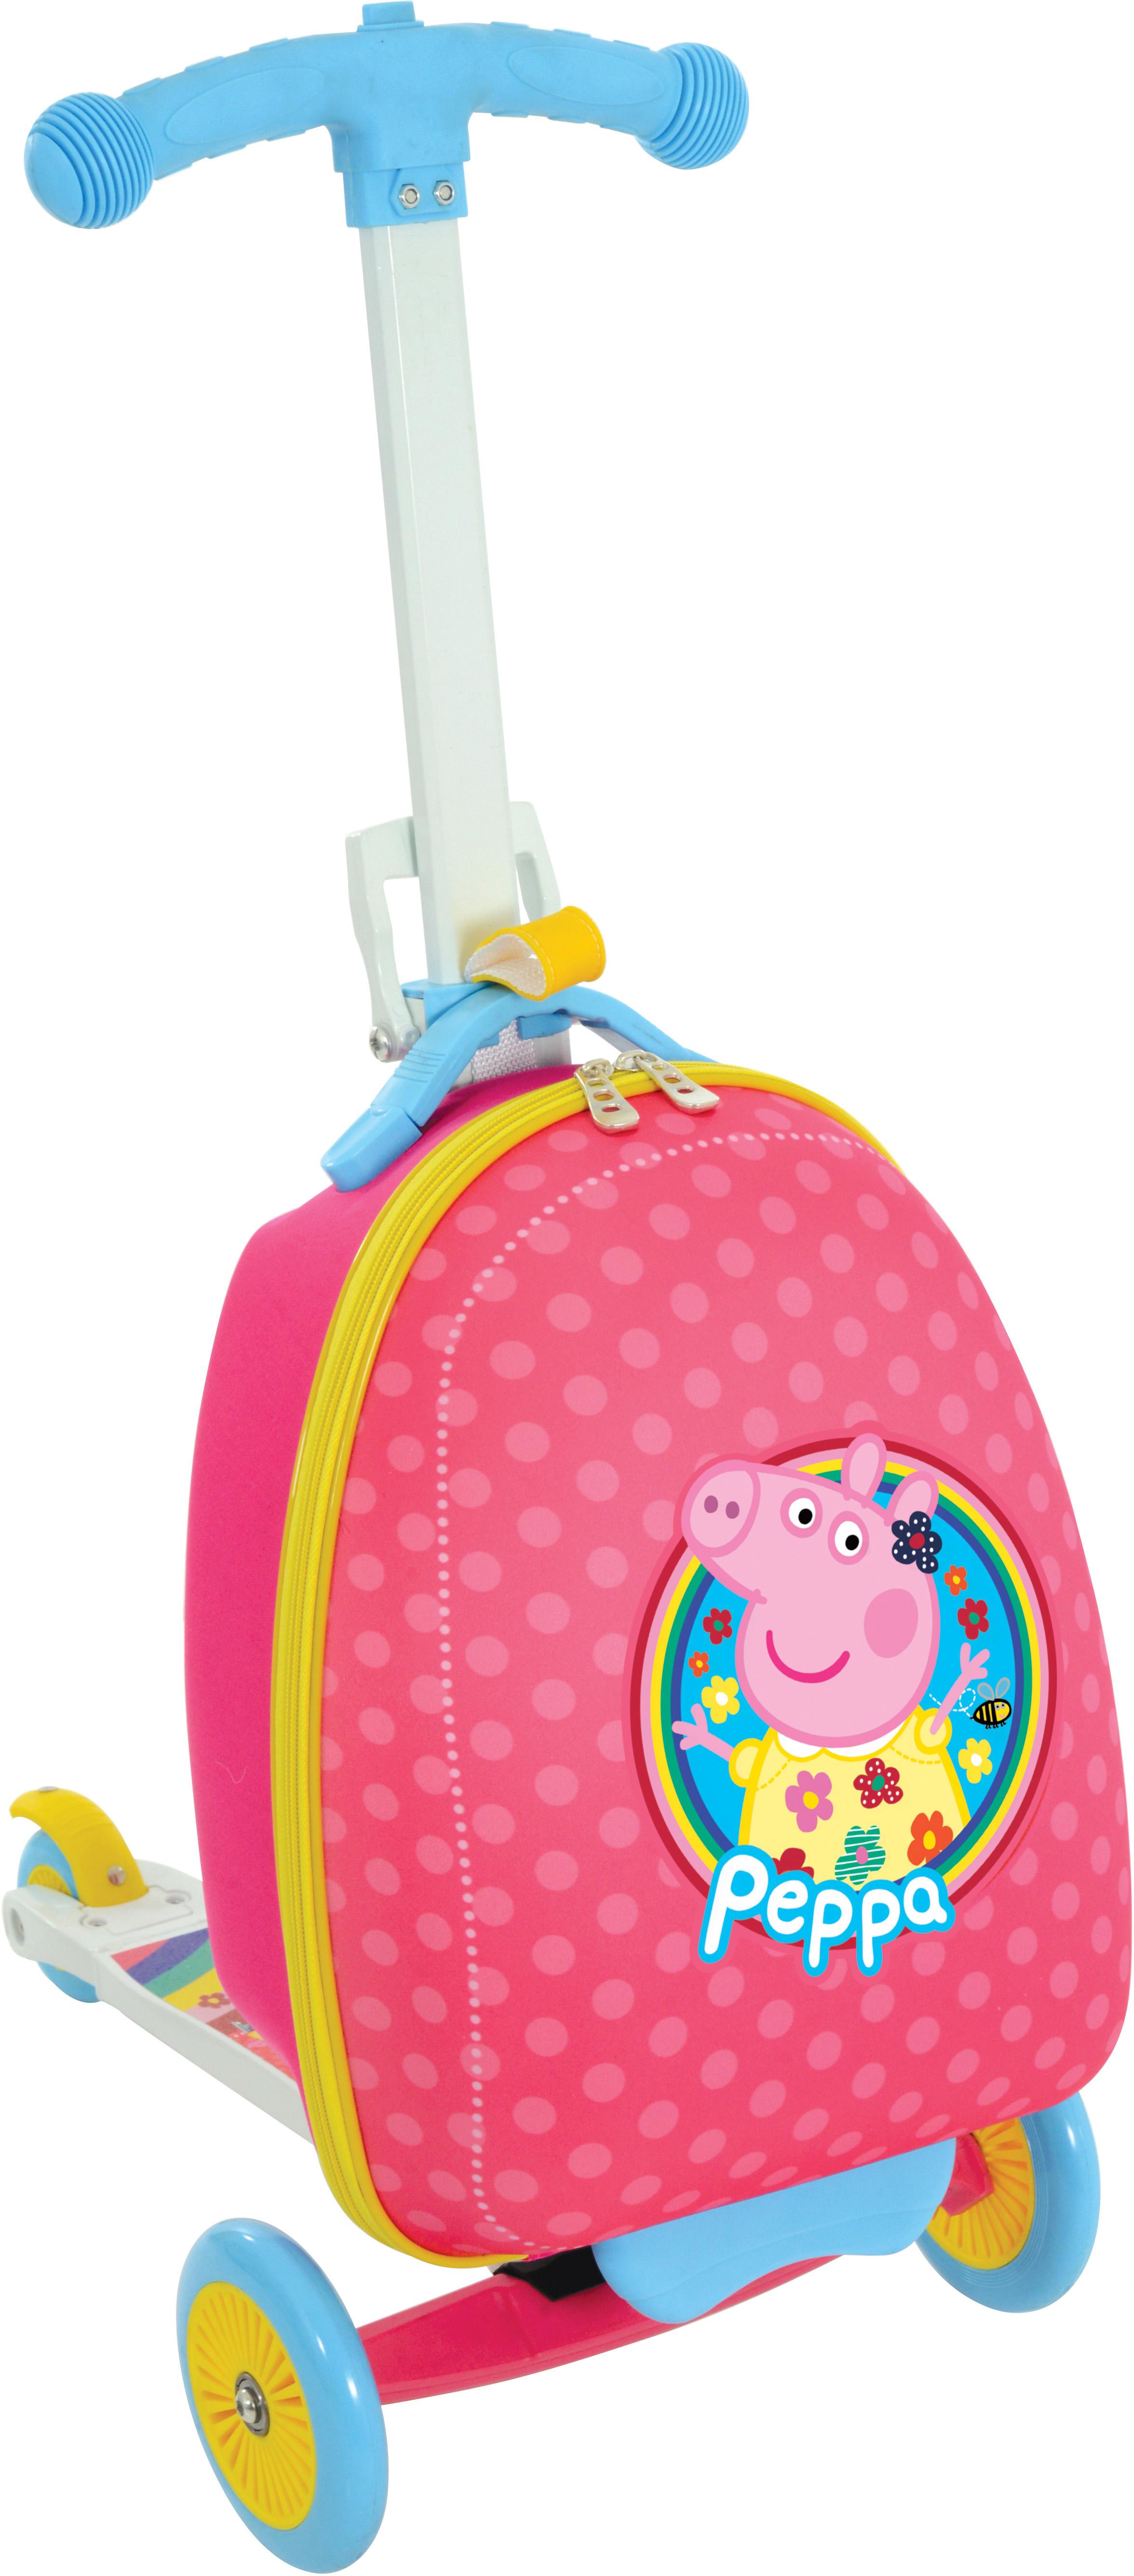 Peppa Pig 3-In-1 Scootin' Suitcase